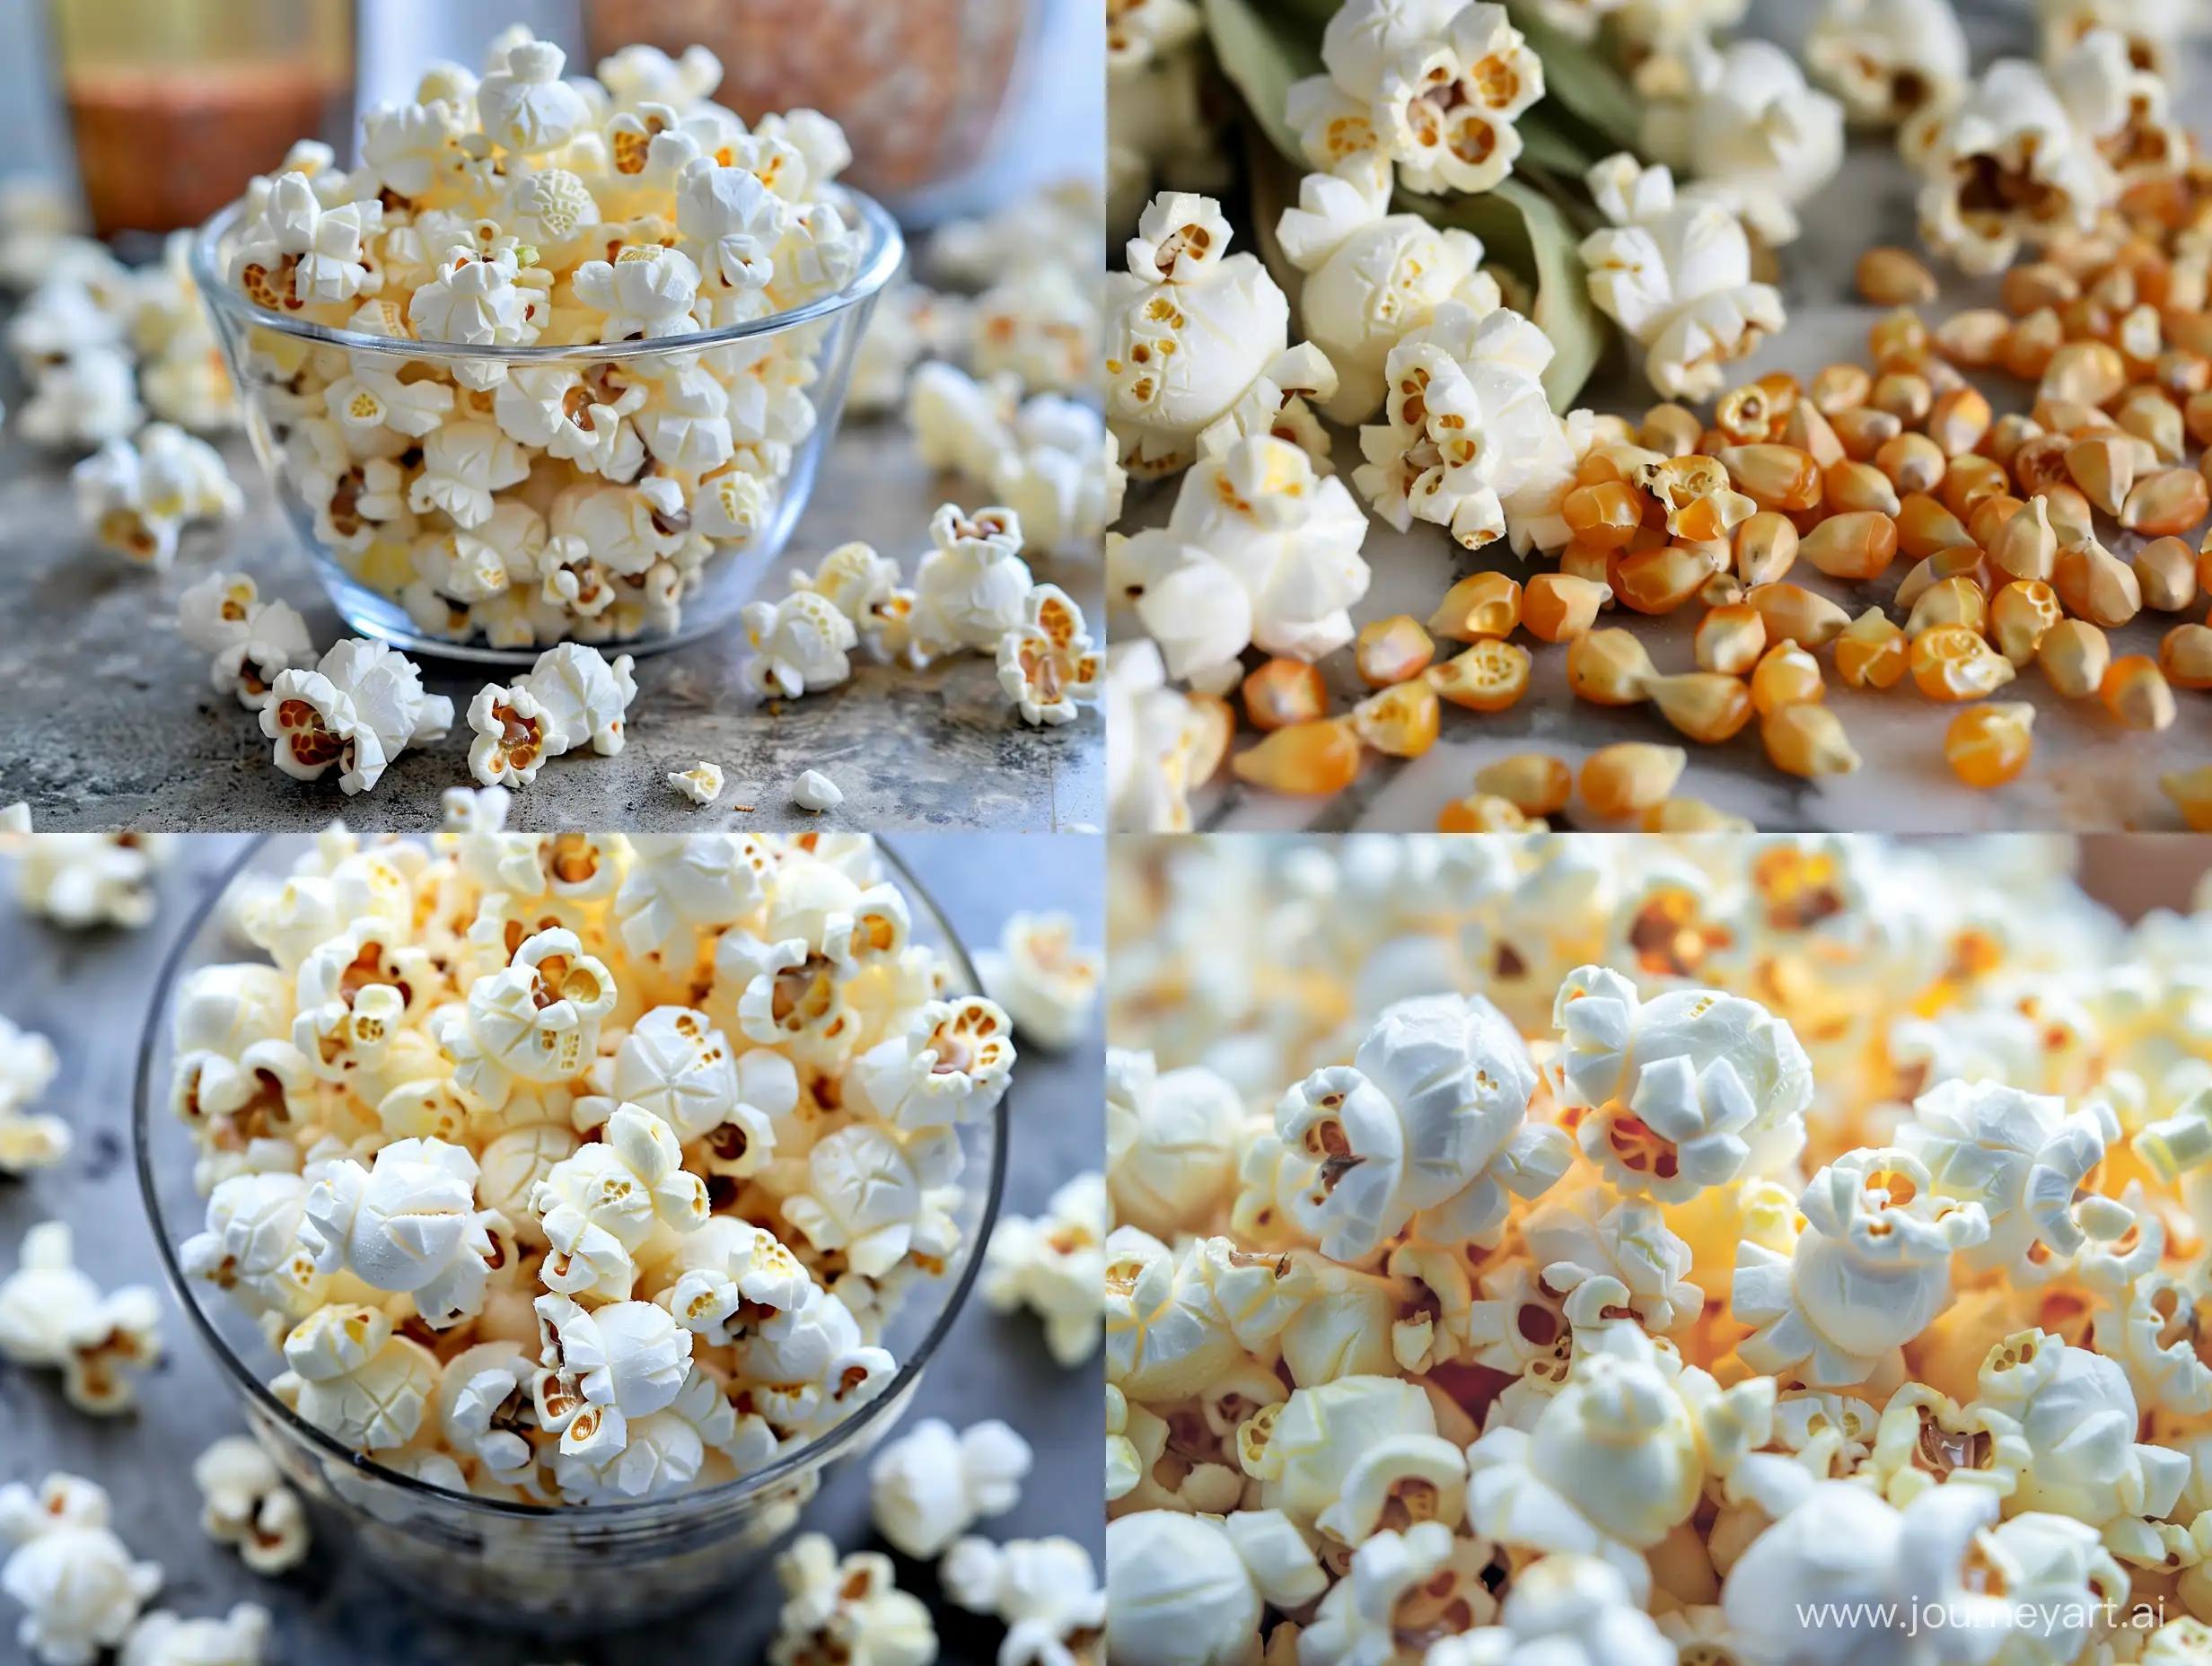 Popcorn kernels are like tiny packages filled with a little bit of water inside a tough outer shell. It's this water that holds the key to the magic of popping